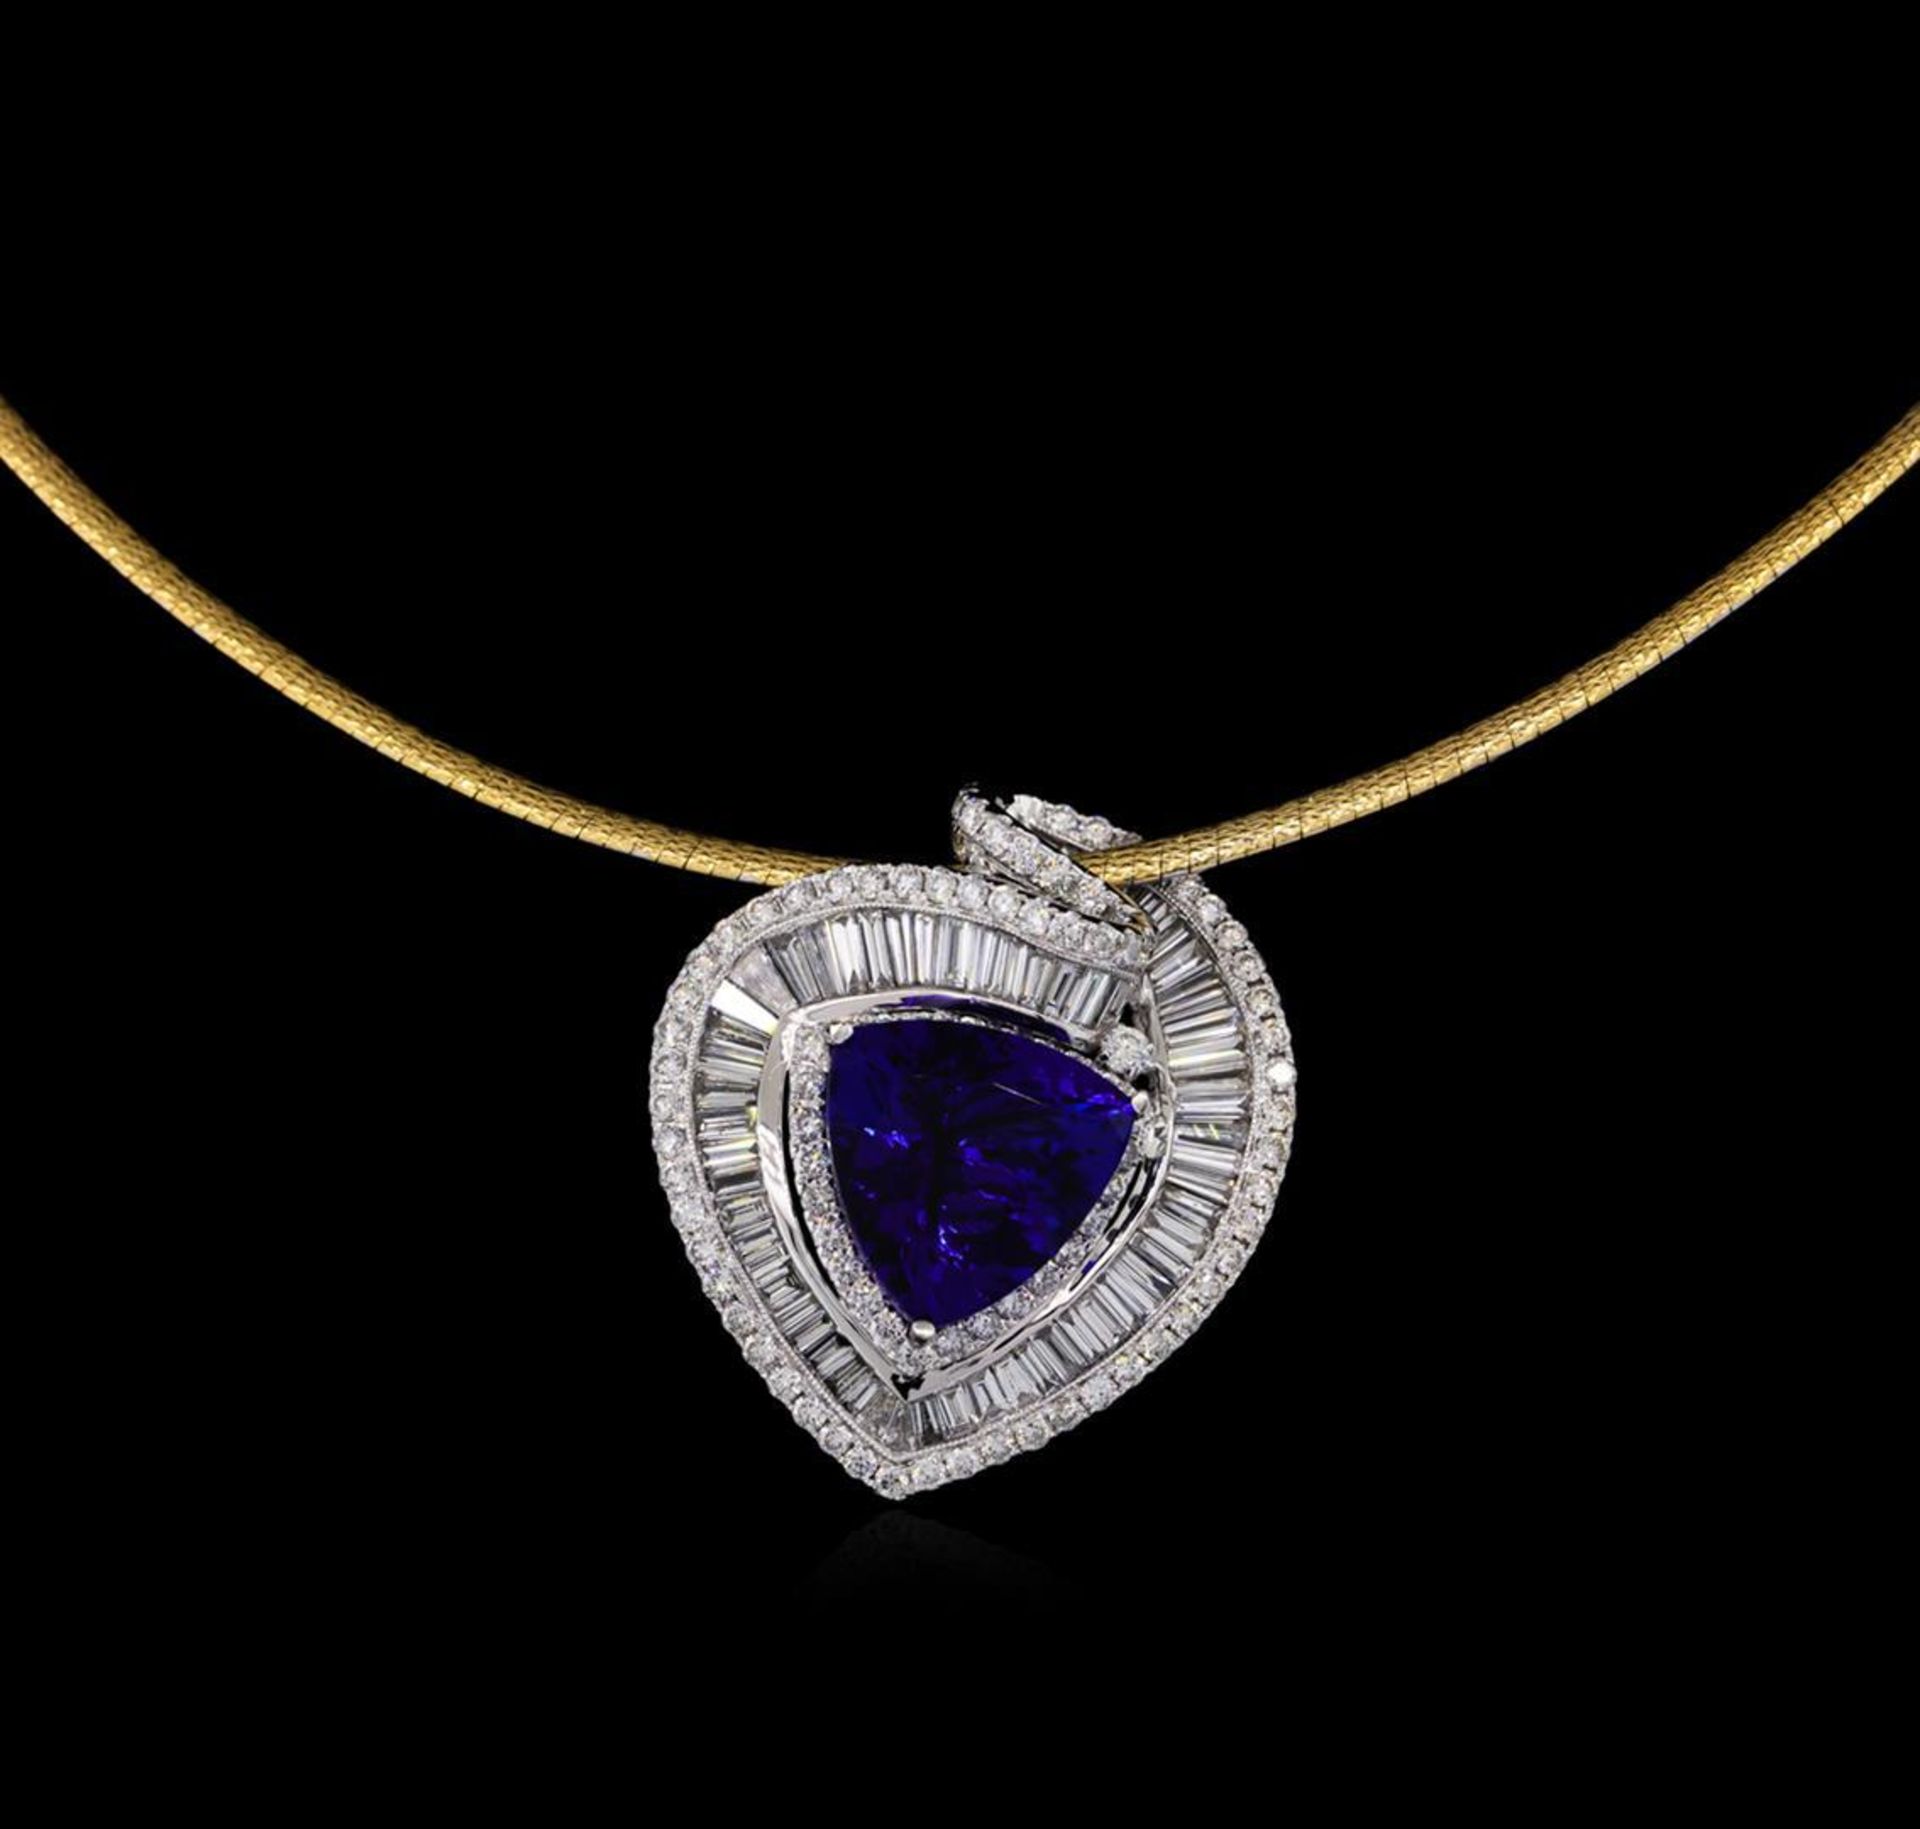 14KT Two-Tone Gold 10.88 ctw Tanzanite and Diamond Pendant With Chain - Image 2 of 4